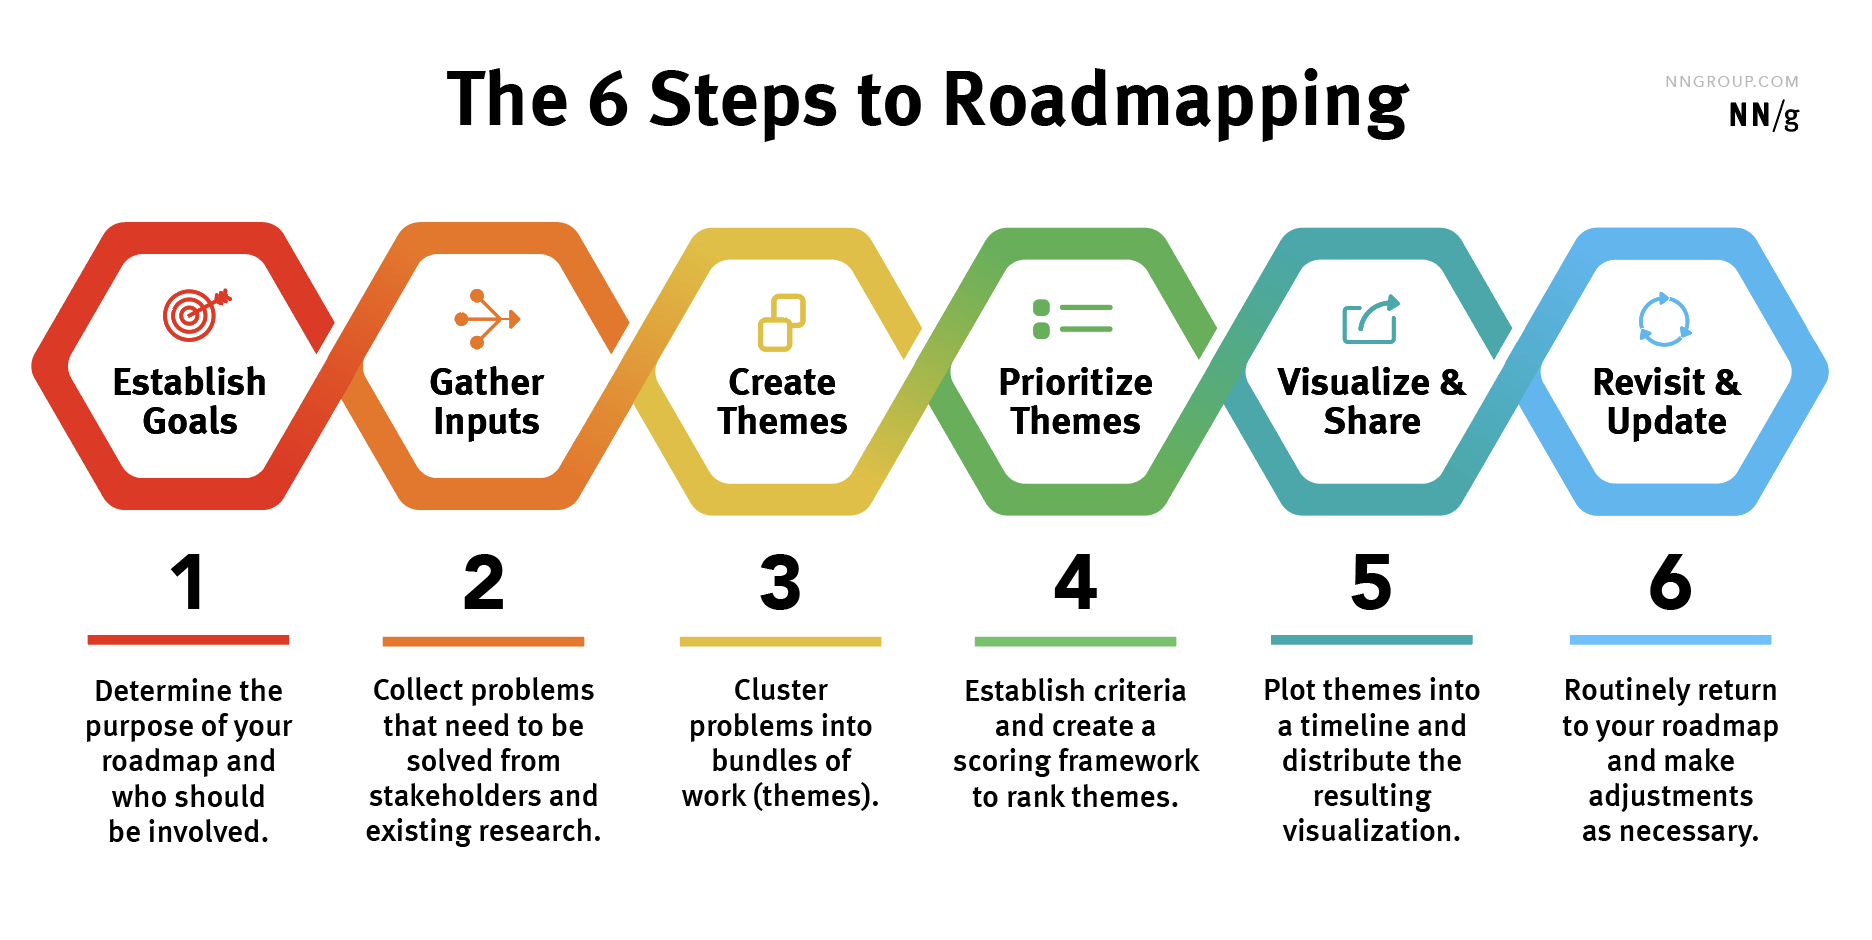 6 Steps to Roadmapping: Establish Goals, Gather Inputs, Create Themes, Prioritize, Visualize, and Revisit